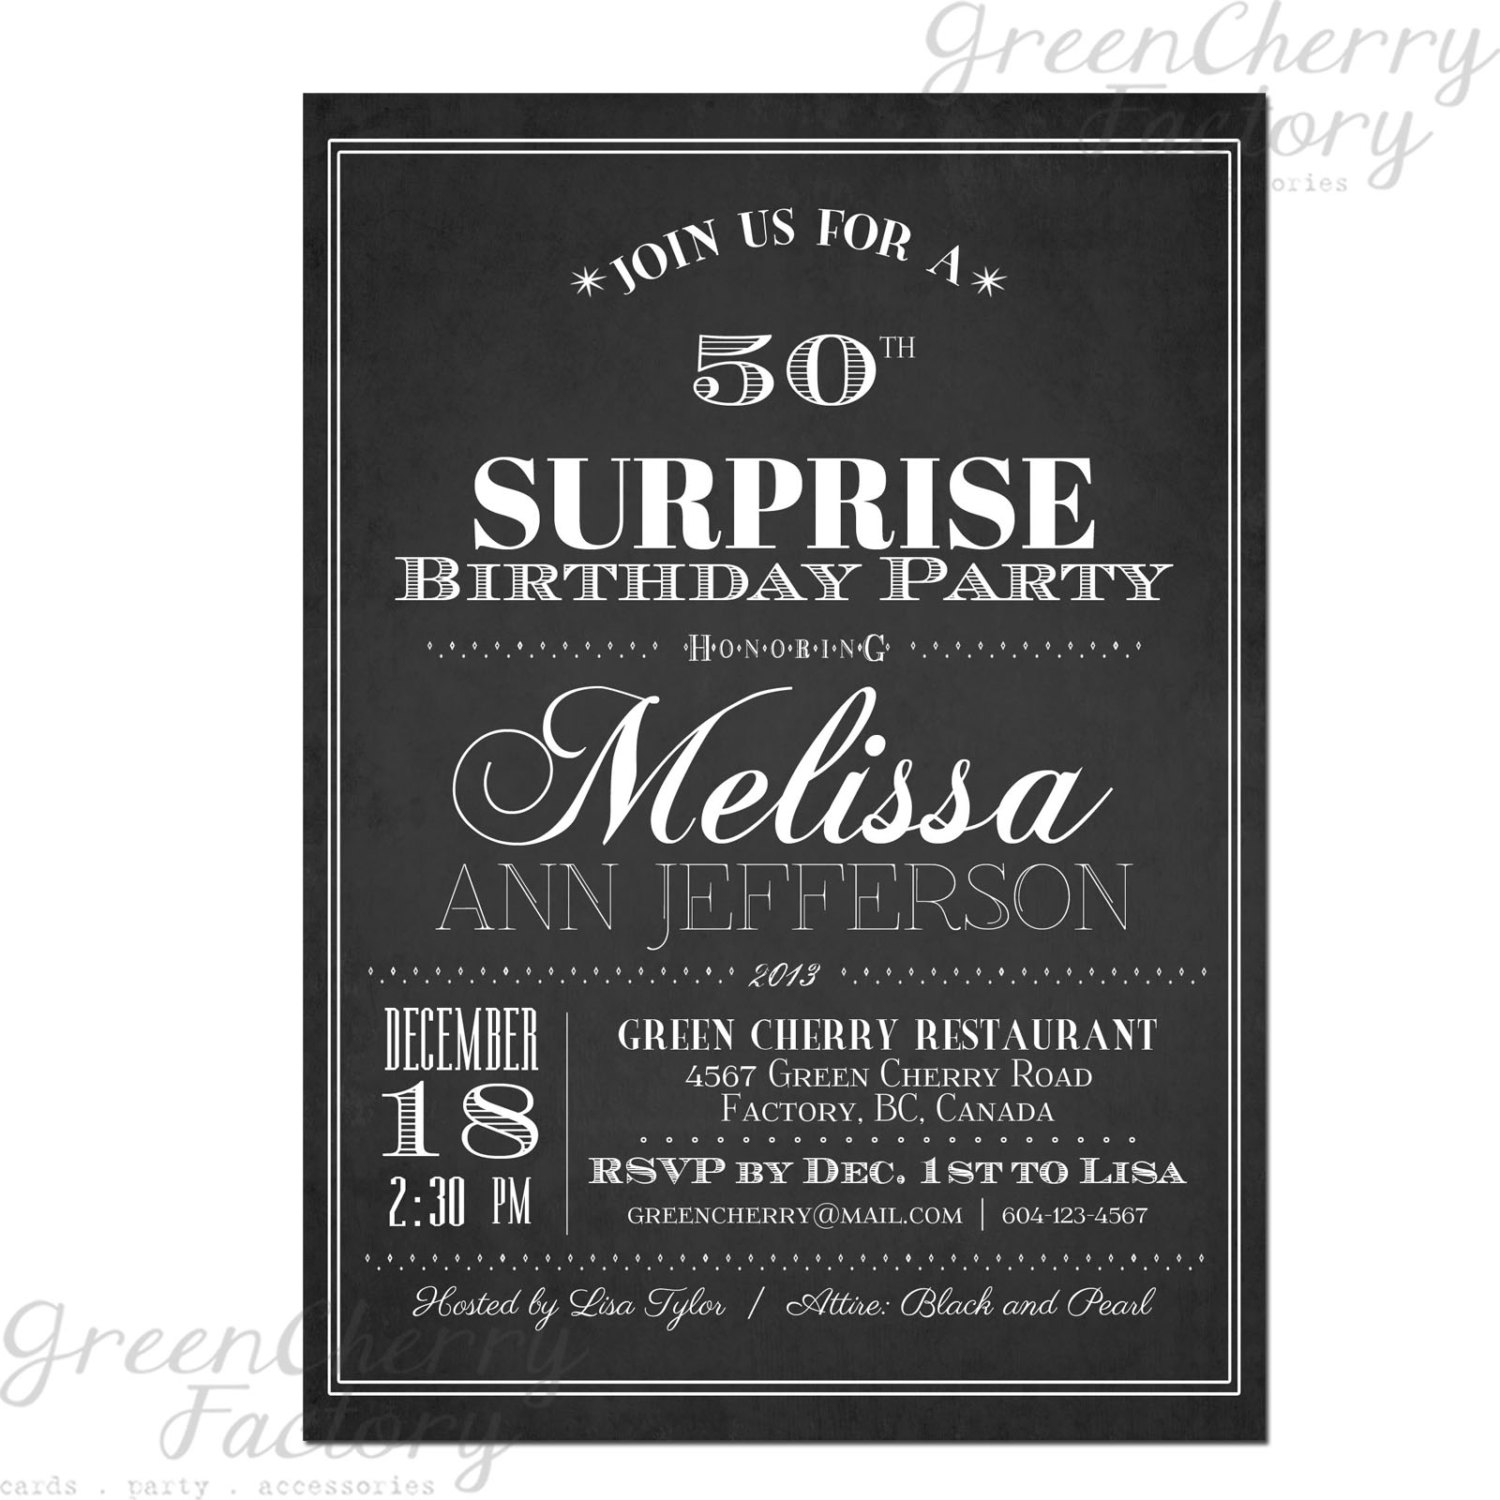 Text Simple Birthday Invitation Message For Adults - Holiday Party Invitation Wording - Now that